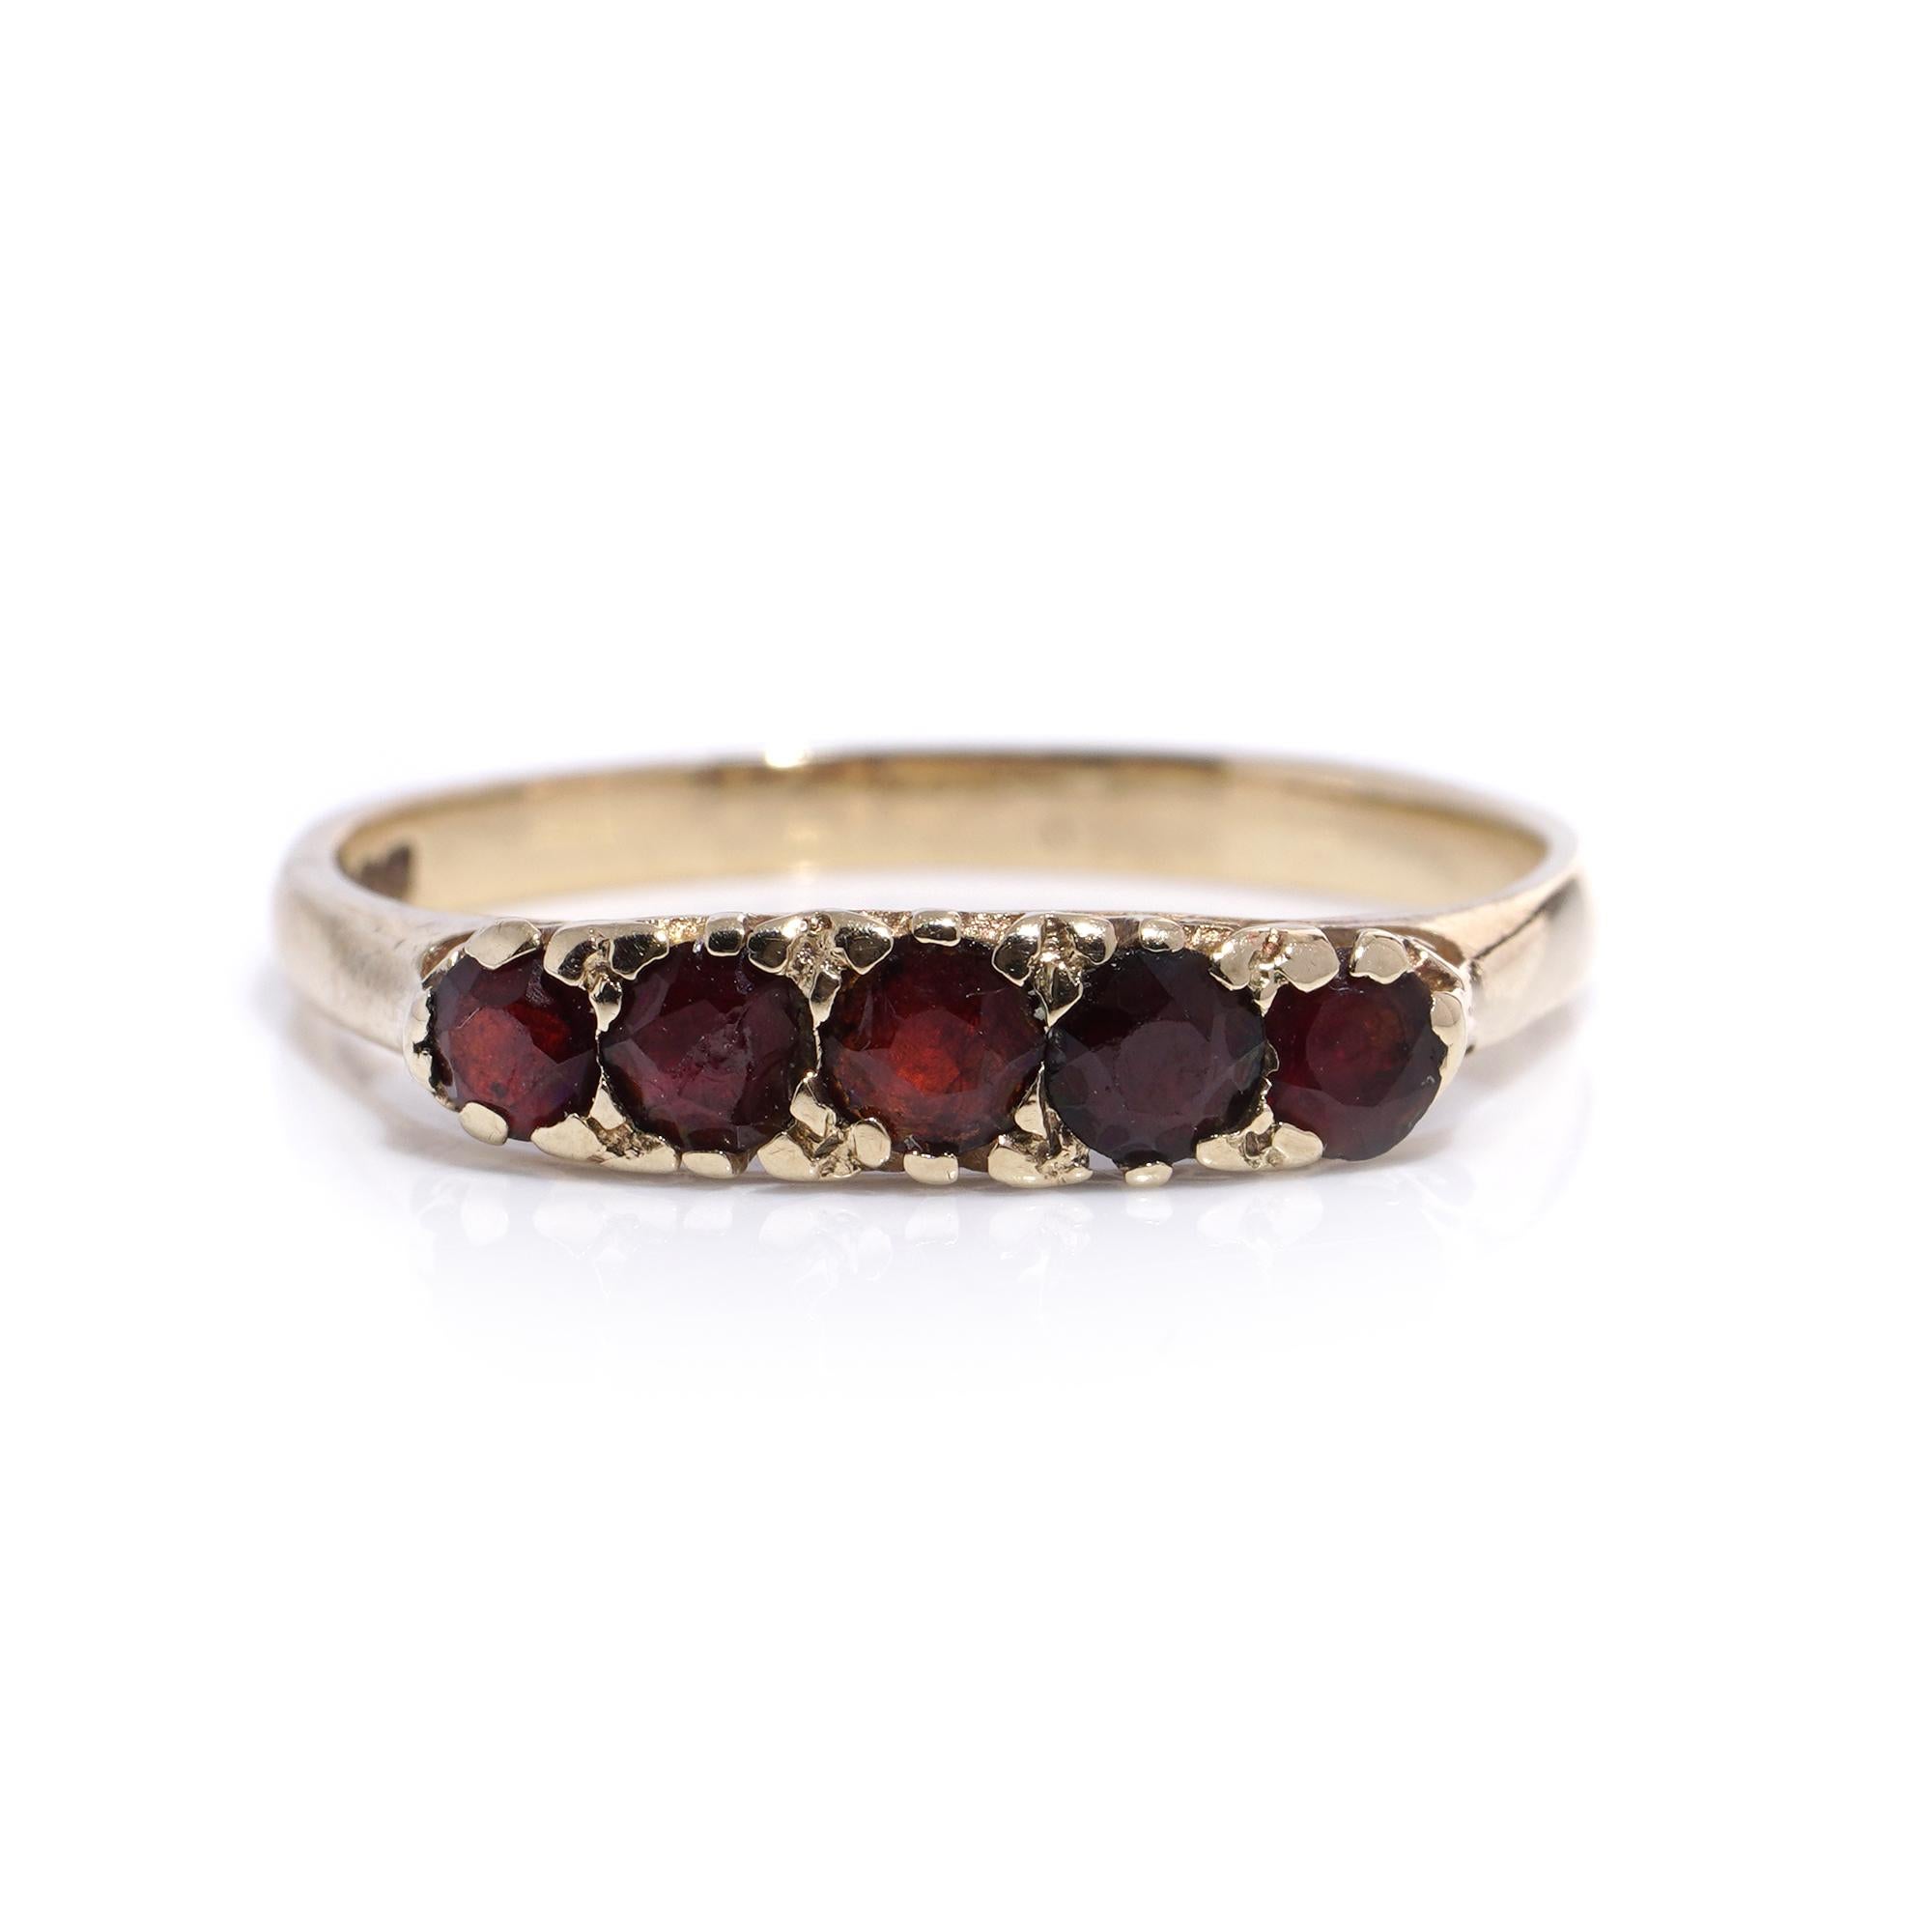 Vintage 9kt yellow gold five-stone garnet ring.
Made in England, London, 1982
Fully Hallmarked.

Dimensions -
Finger Size (UK) = L (EU) = 53 (US) = 6
Weight: 2.00 grams

Garnets -
Cut: Round faceted
Quantity of stones: 5
Carat weight: 0.41 carats in